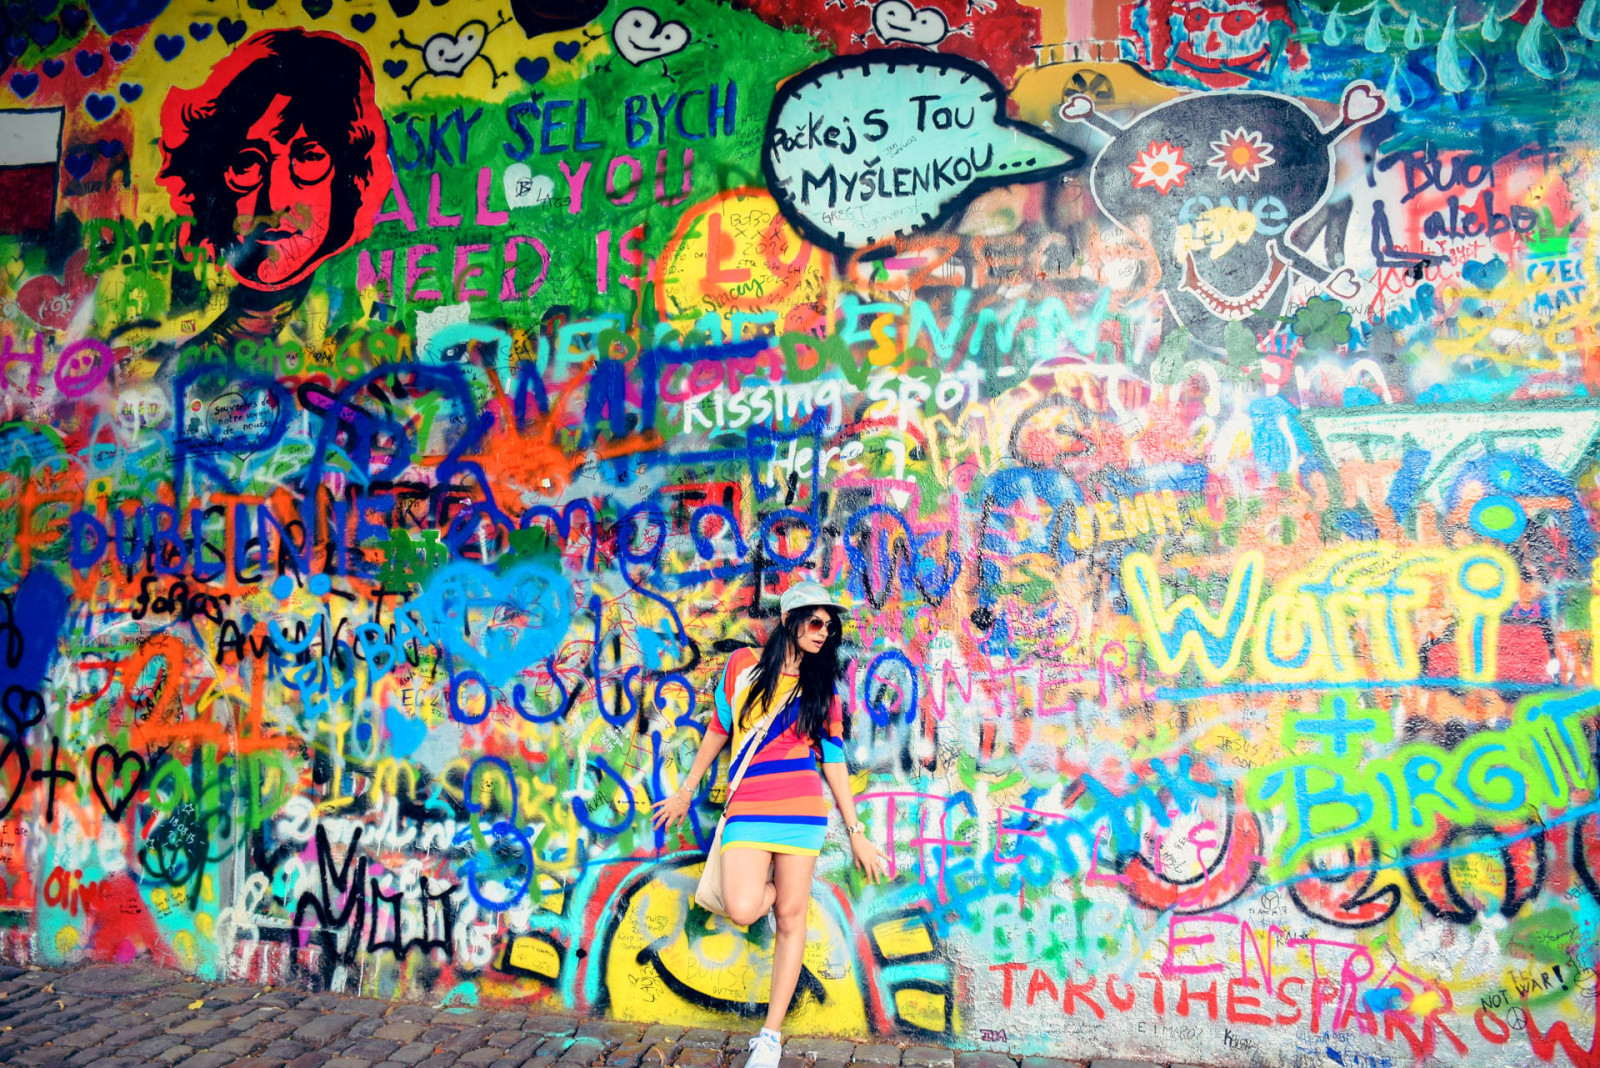 Lennon Wall and some strolling